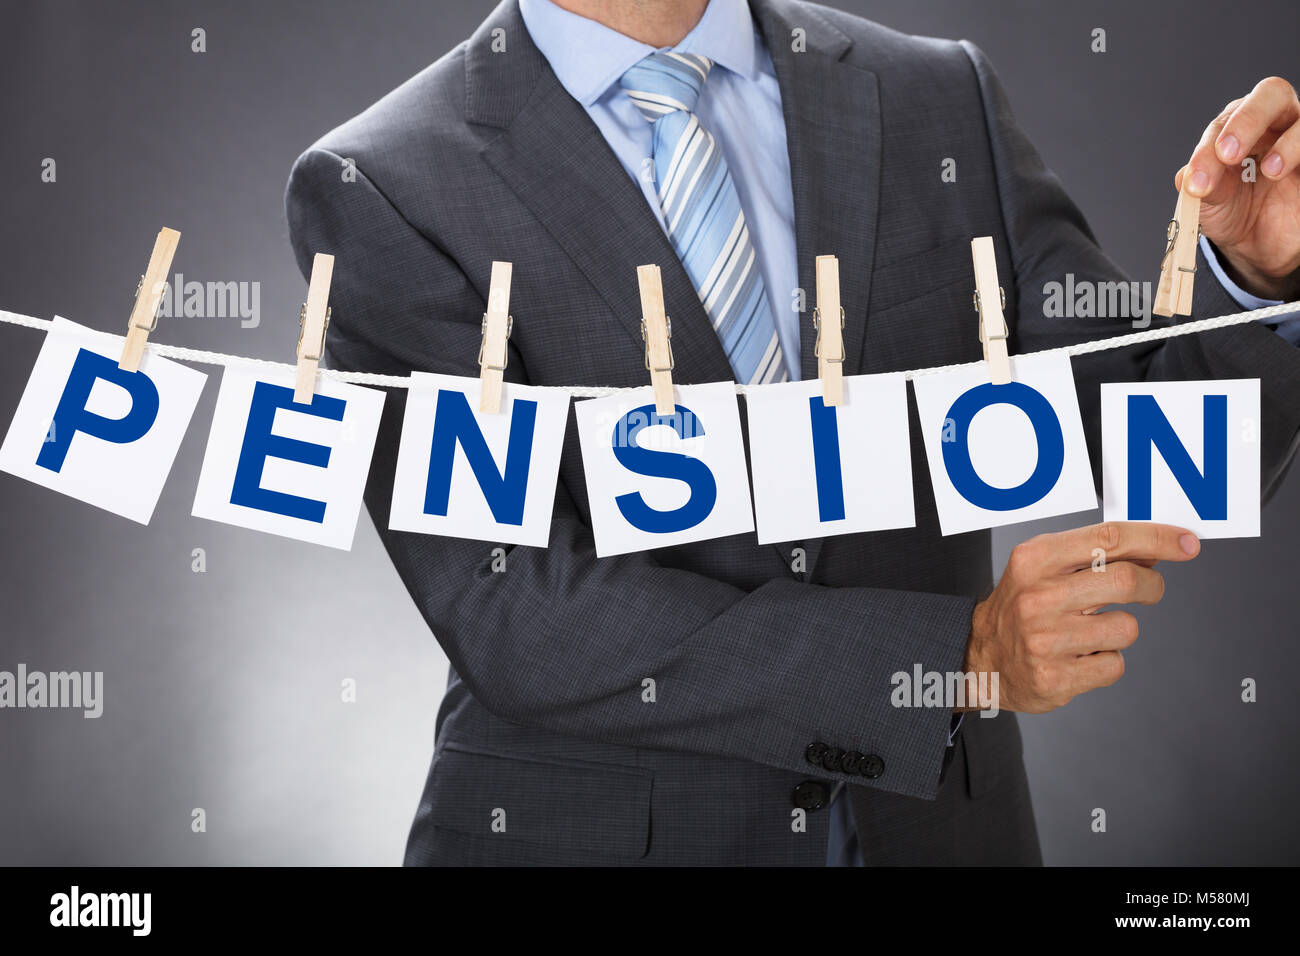 Closeup midsection of businessman pinning PENSION cards on clothesline Stock Photo